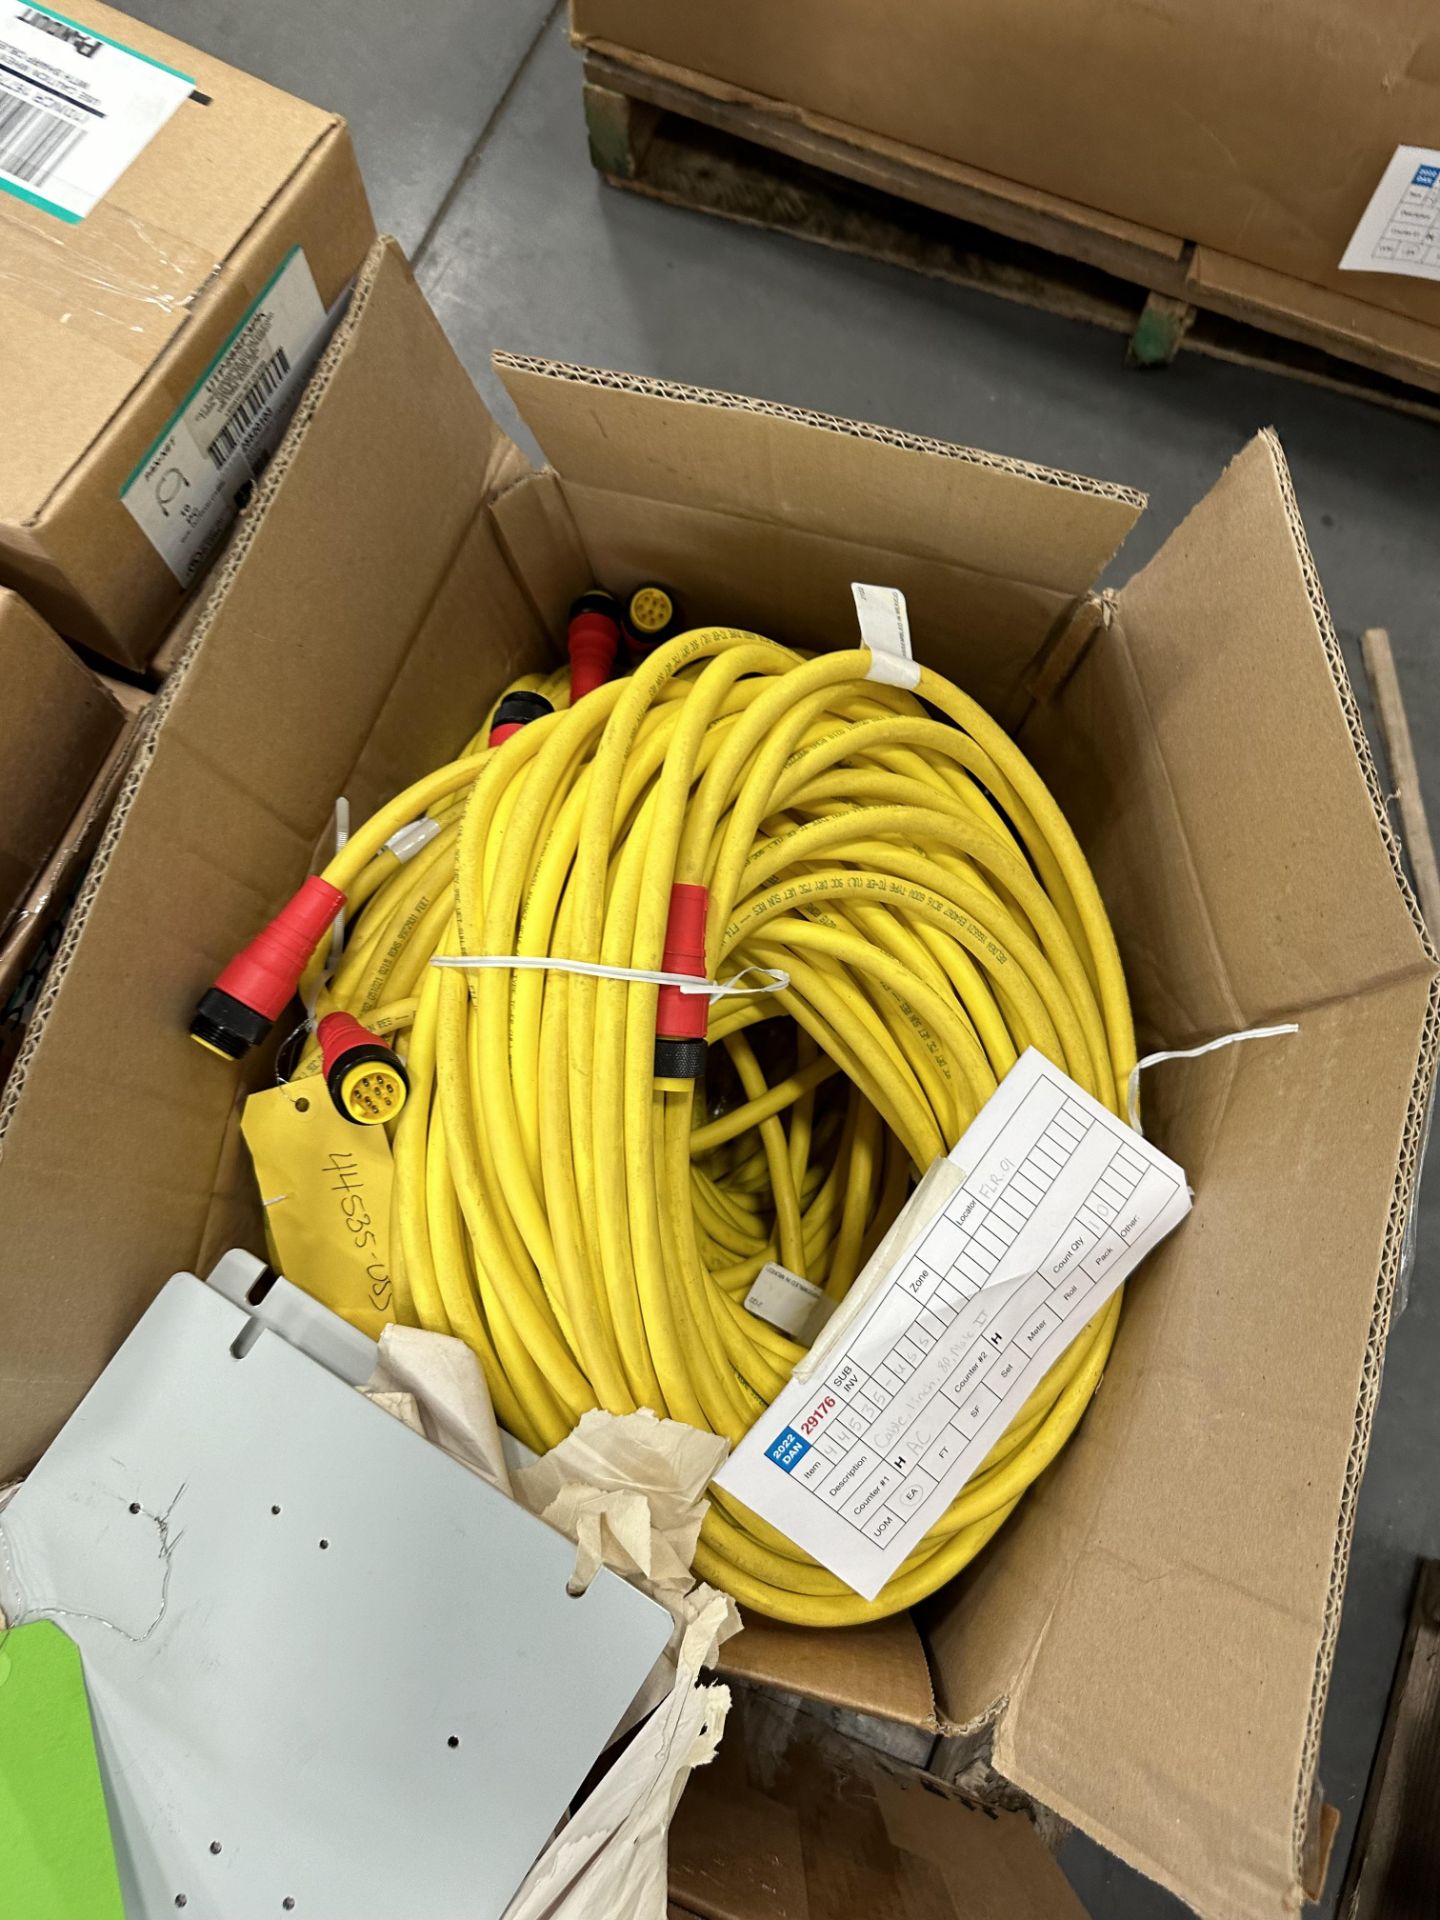 New Panduit 3ft Ethernet Cable and Turck 8P Male Cable - Image 4 of 8